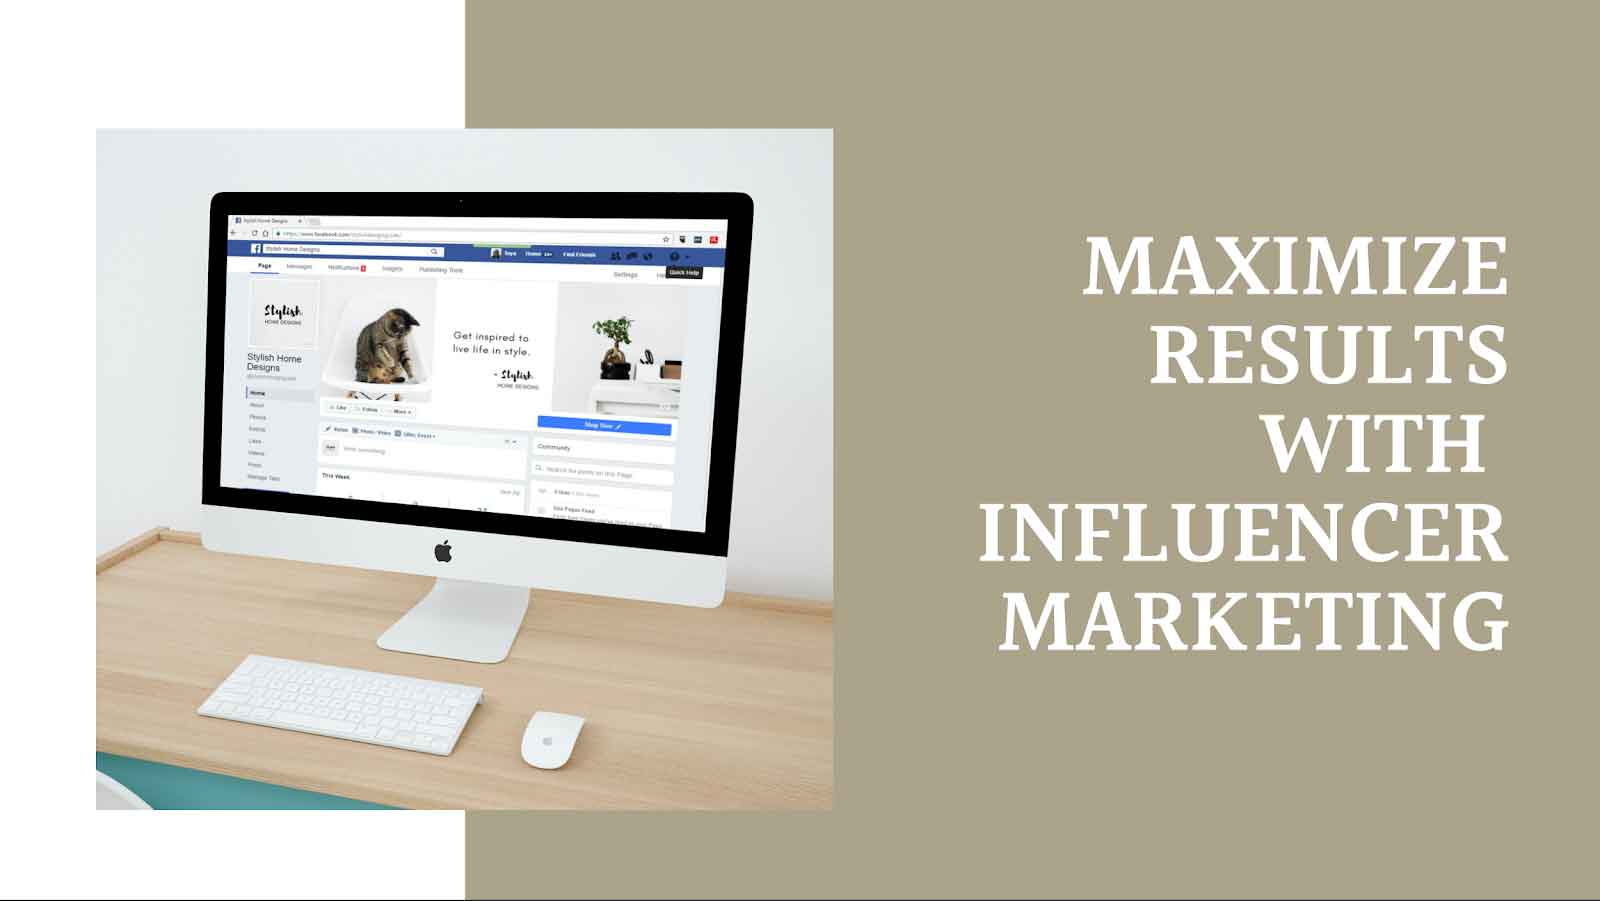 Maximize Results with Influencer Marketing